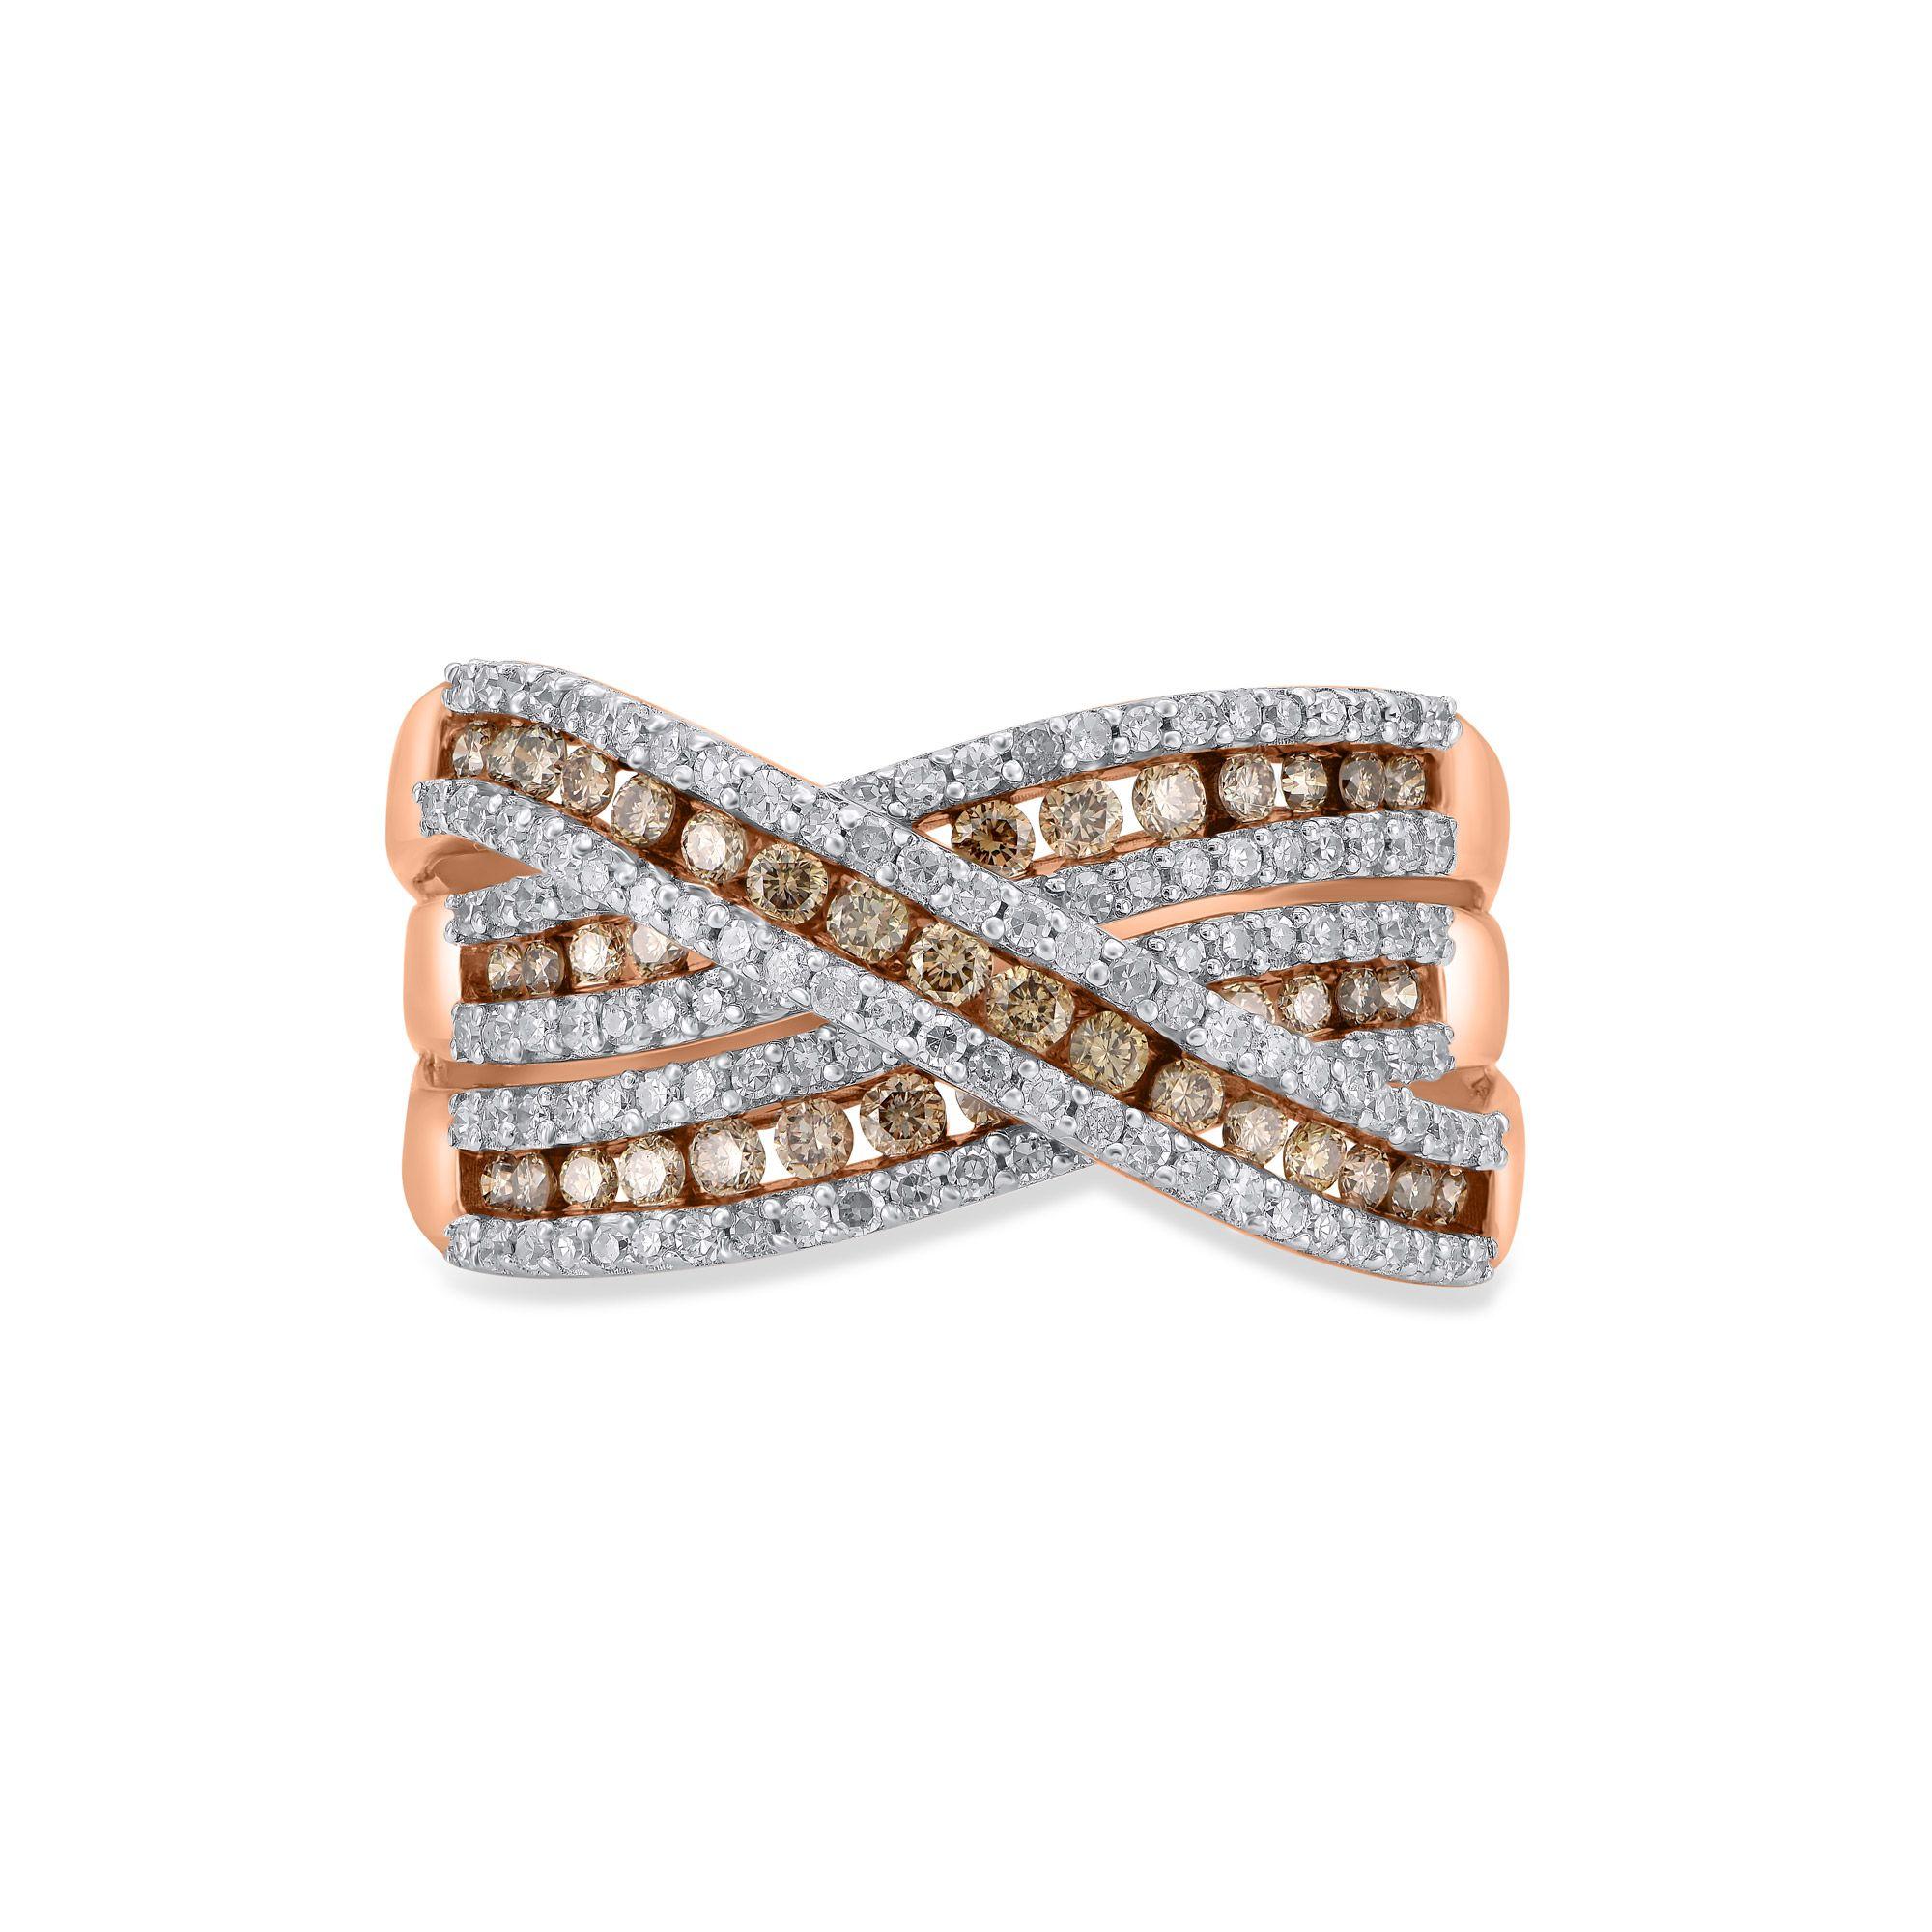 This comfort fit Criss-cross Cocktail diamond ring is crafted in 10 kt rose gold. Dazzles with 187 round-cut diamonds embedded beautifully in prong and channel setting. White diamonds are graded H-I Color, I3 Clarity and Champagne diamonds I1-I3